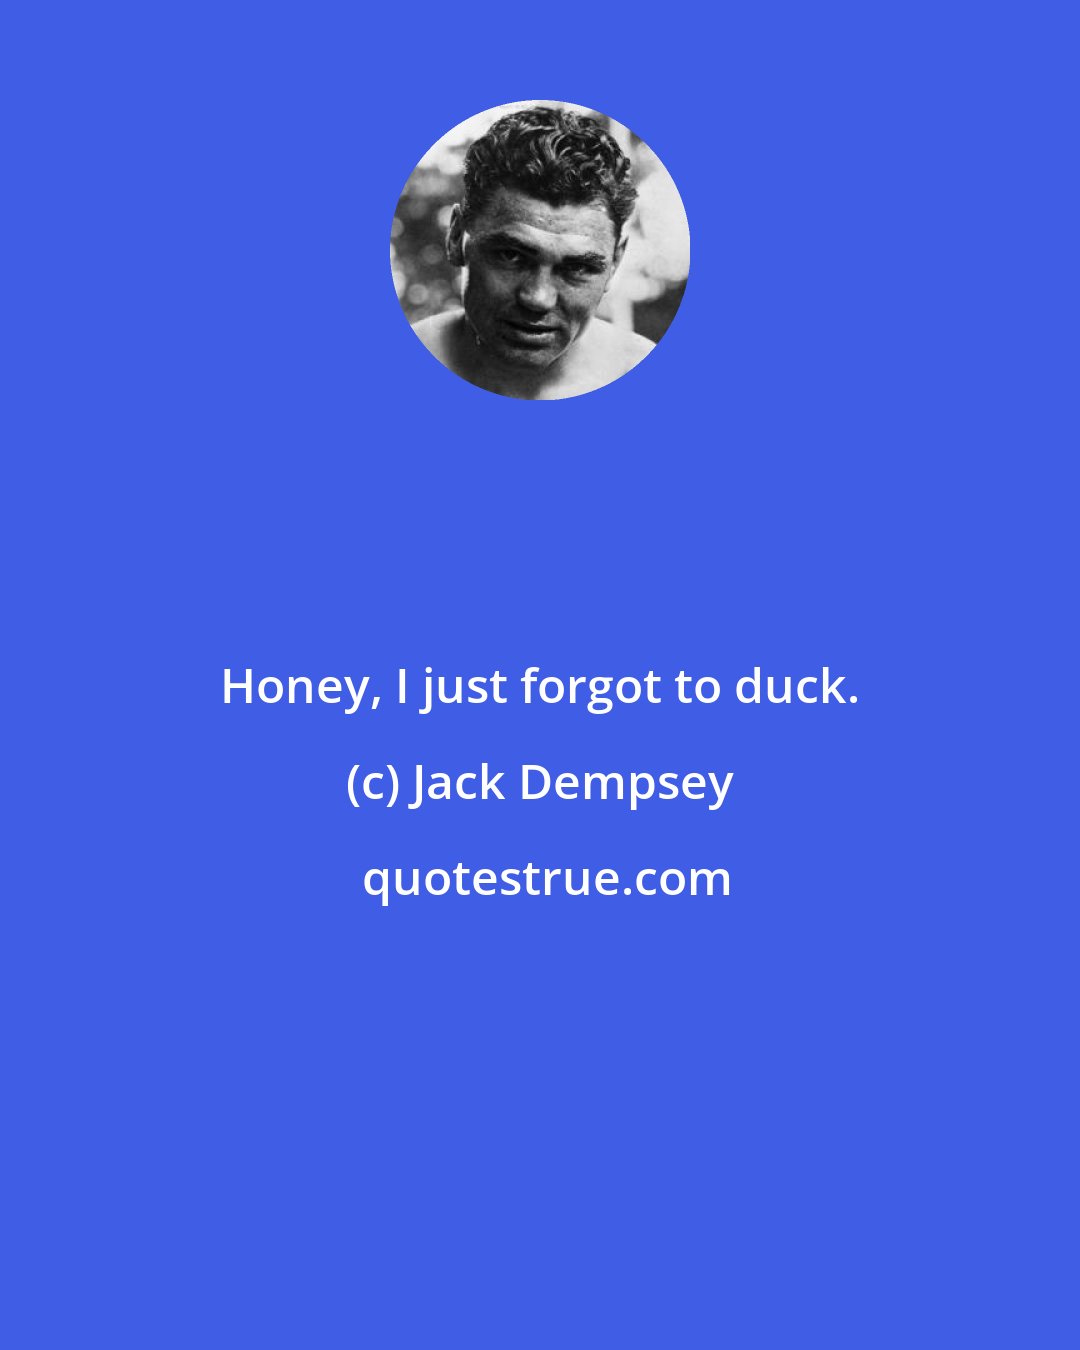 Jack Dempsey: Honey, I just forgot to duck.